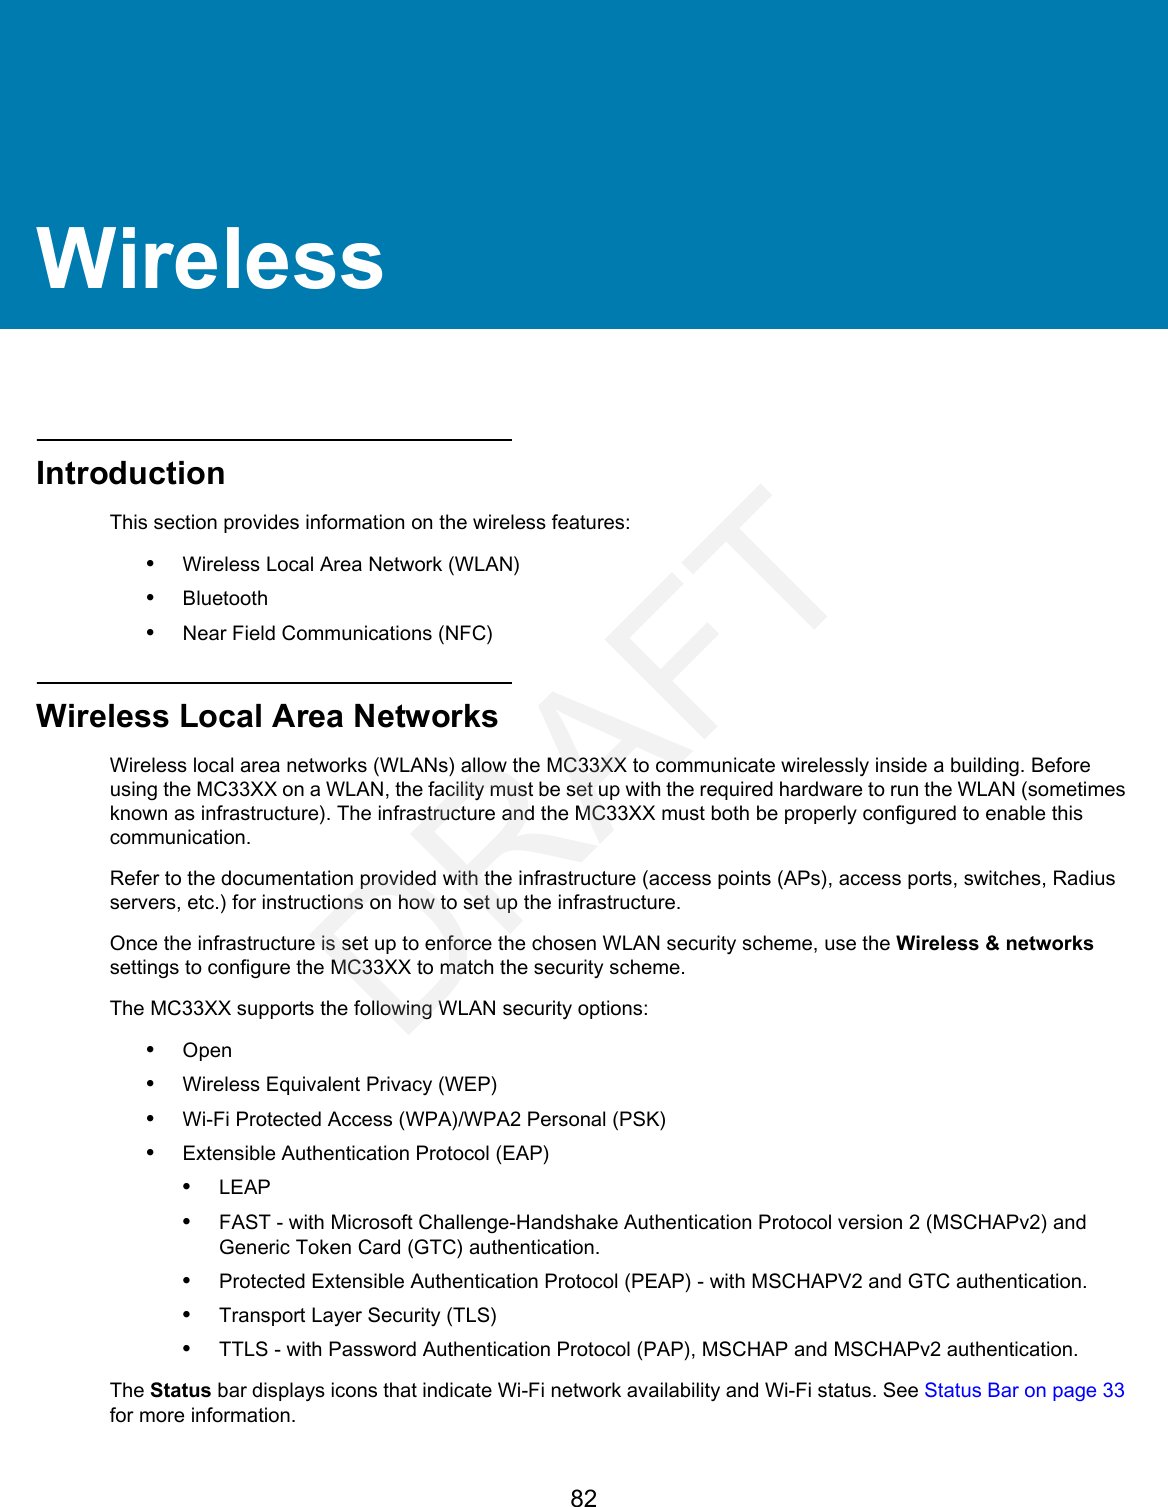 82WirelessIntroductionThis section provides information on the wireless features:•Wireless Local Area Network (WLAN)•Bluetooth•Near Field Communications (NFC)Wireless Local Area NetworksWireless local area networks (WLANs) allow the MC33XX to communicate wirelessly inside a building. Before using the MC33XX on a WLAN, the facility must be set up with the required hardware to run the WLAN (sometimes known as infrastructure). The infrastructure and the MC33XX must both be properly configured to enable this communication.Refer to the documentation provided with the infrastructure (access points (APs), access ports, switches, Radius servers, etc.) for instructions on how to set up the infrastructure.Once the infrastructure is set up to enforce the chosen WLAN security scheme, use the Wireless &amp; networks settings to configure the MC33XX to match the security scheme.The MC33XX supports the following WLAN security options:•Open•Wireless Equivalent Privacy (WEP)•Wi-Fi Protected Access (WPA)/WPA2 Personal (PSK)•Extensible Authentication Protocol (EAP)•LEAP•FAST - with Microsoft Challenge-Handshake Authentication Protocol version 2 (MSCHAPv2) and Generic Token Card (GTC) authentication.•Protected Extensible Authentication Protocol (PEAP) - with MSCHAPV2 and GTC authentication.•Transport Layer Security (TLS)•TTLS - with Password Authentication Protocol (PAP), MSCHAP and MSCHAPv2 authentication.The Status bar displays icons that indicate Wi-Fi network availability and Wi-Fi status. See Status Bar on page 33 for more information.DRAFT